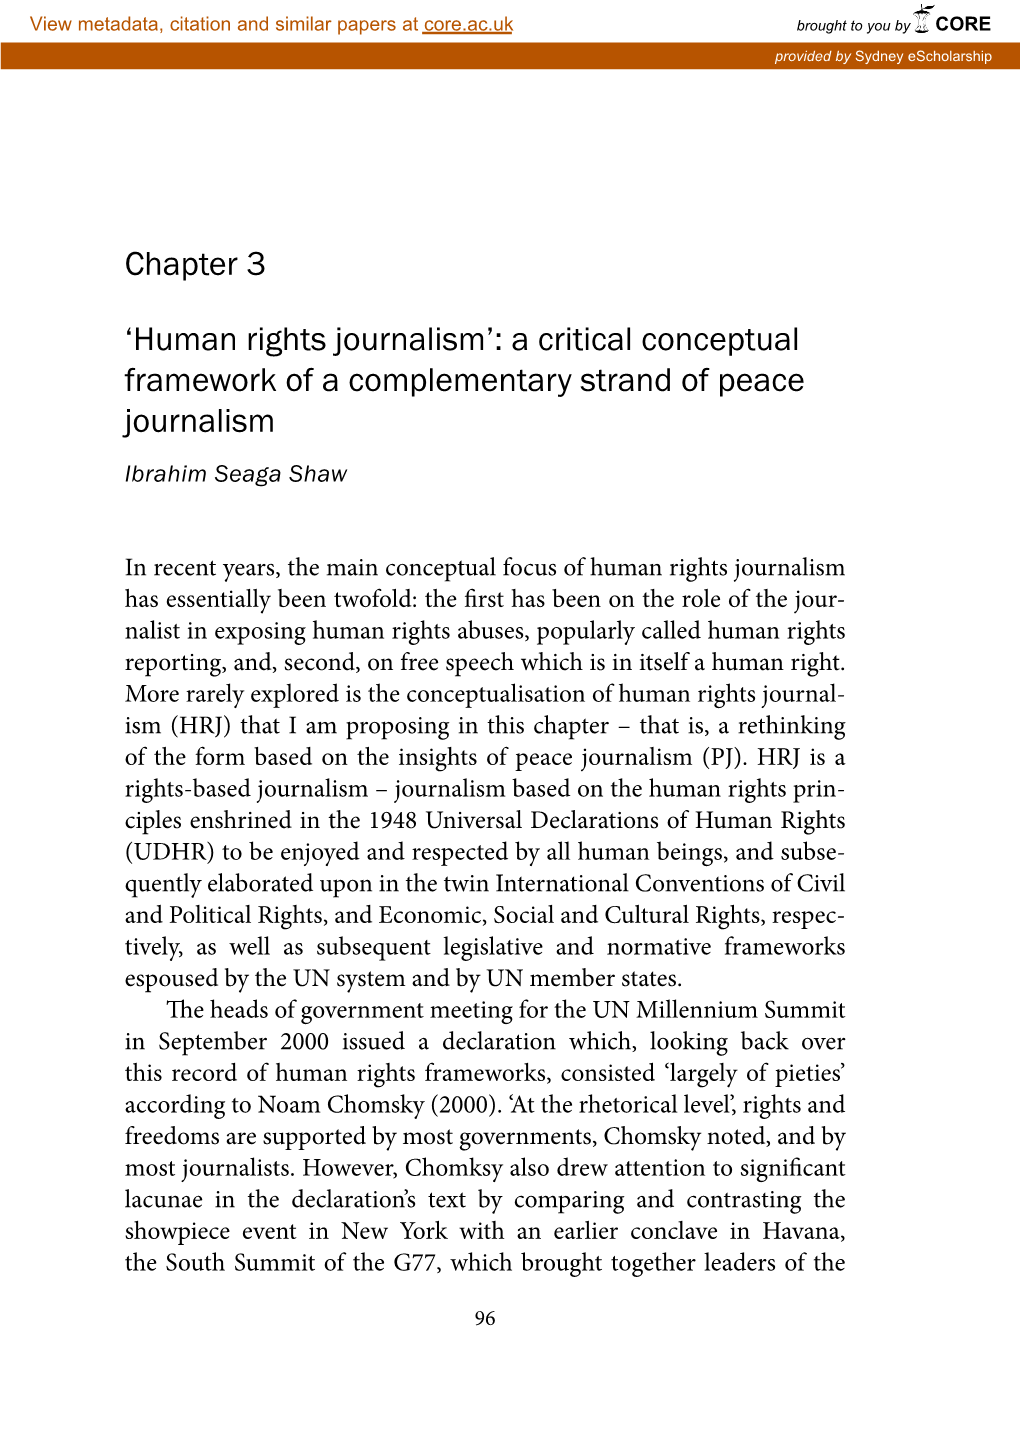 Human Rights Journalism’: a Critical Conceptual Framework of a Complementary Strand of Peace Journalism Ibrahim Seaga Shaw